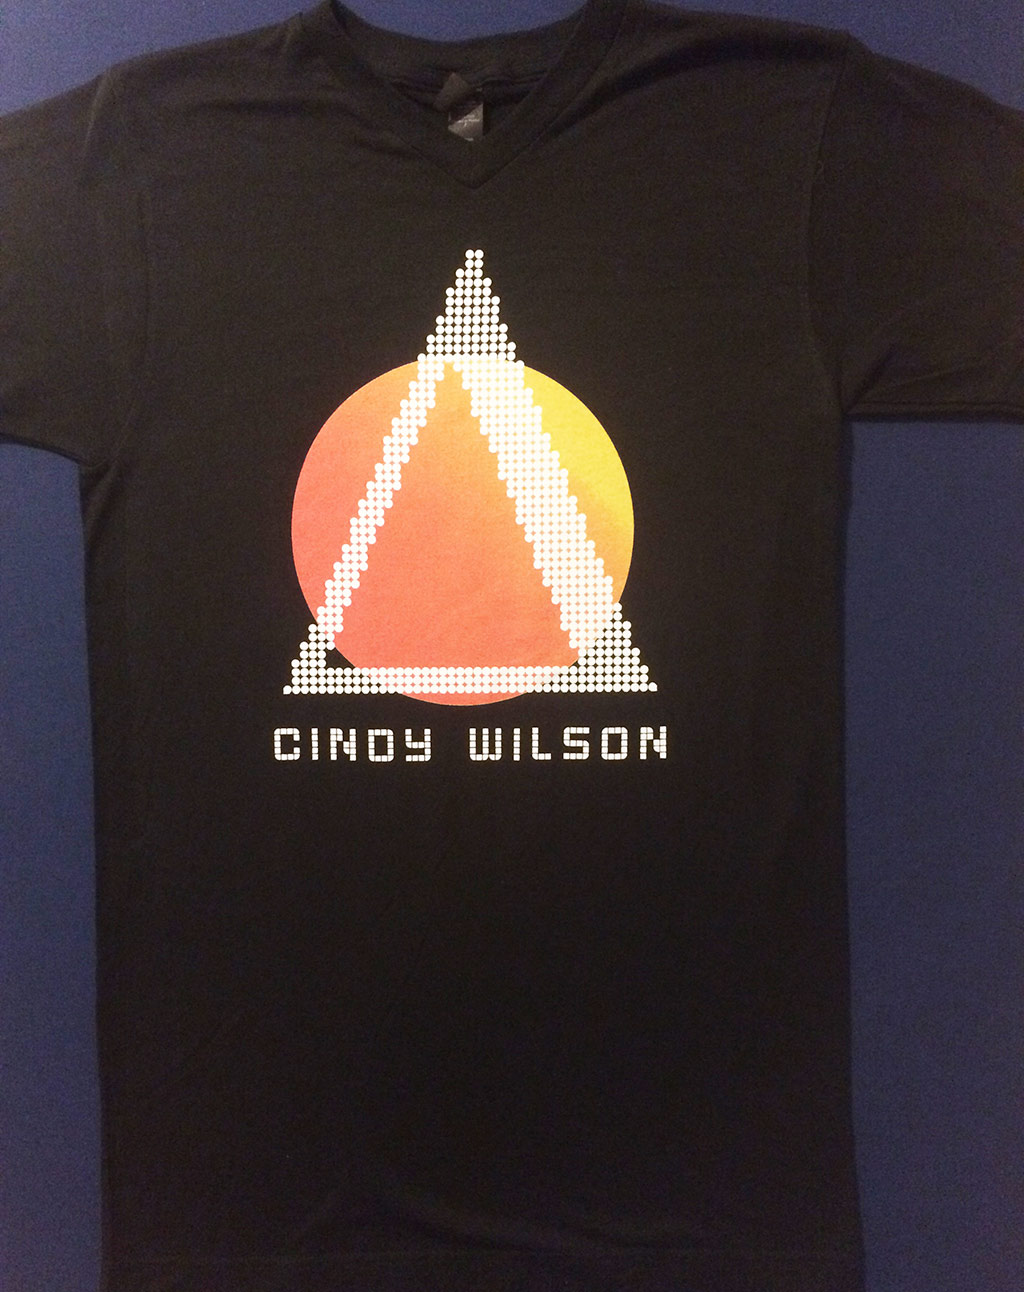 Limited edition Cindy Wilson "Sunrise" black unisex v-neck t-shirt featuring art by Suny Lyons.